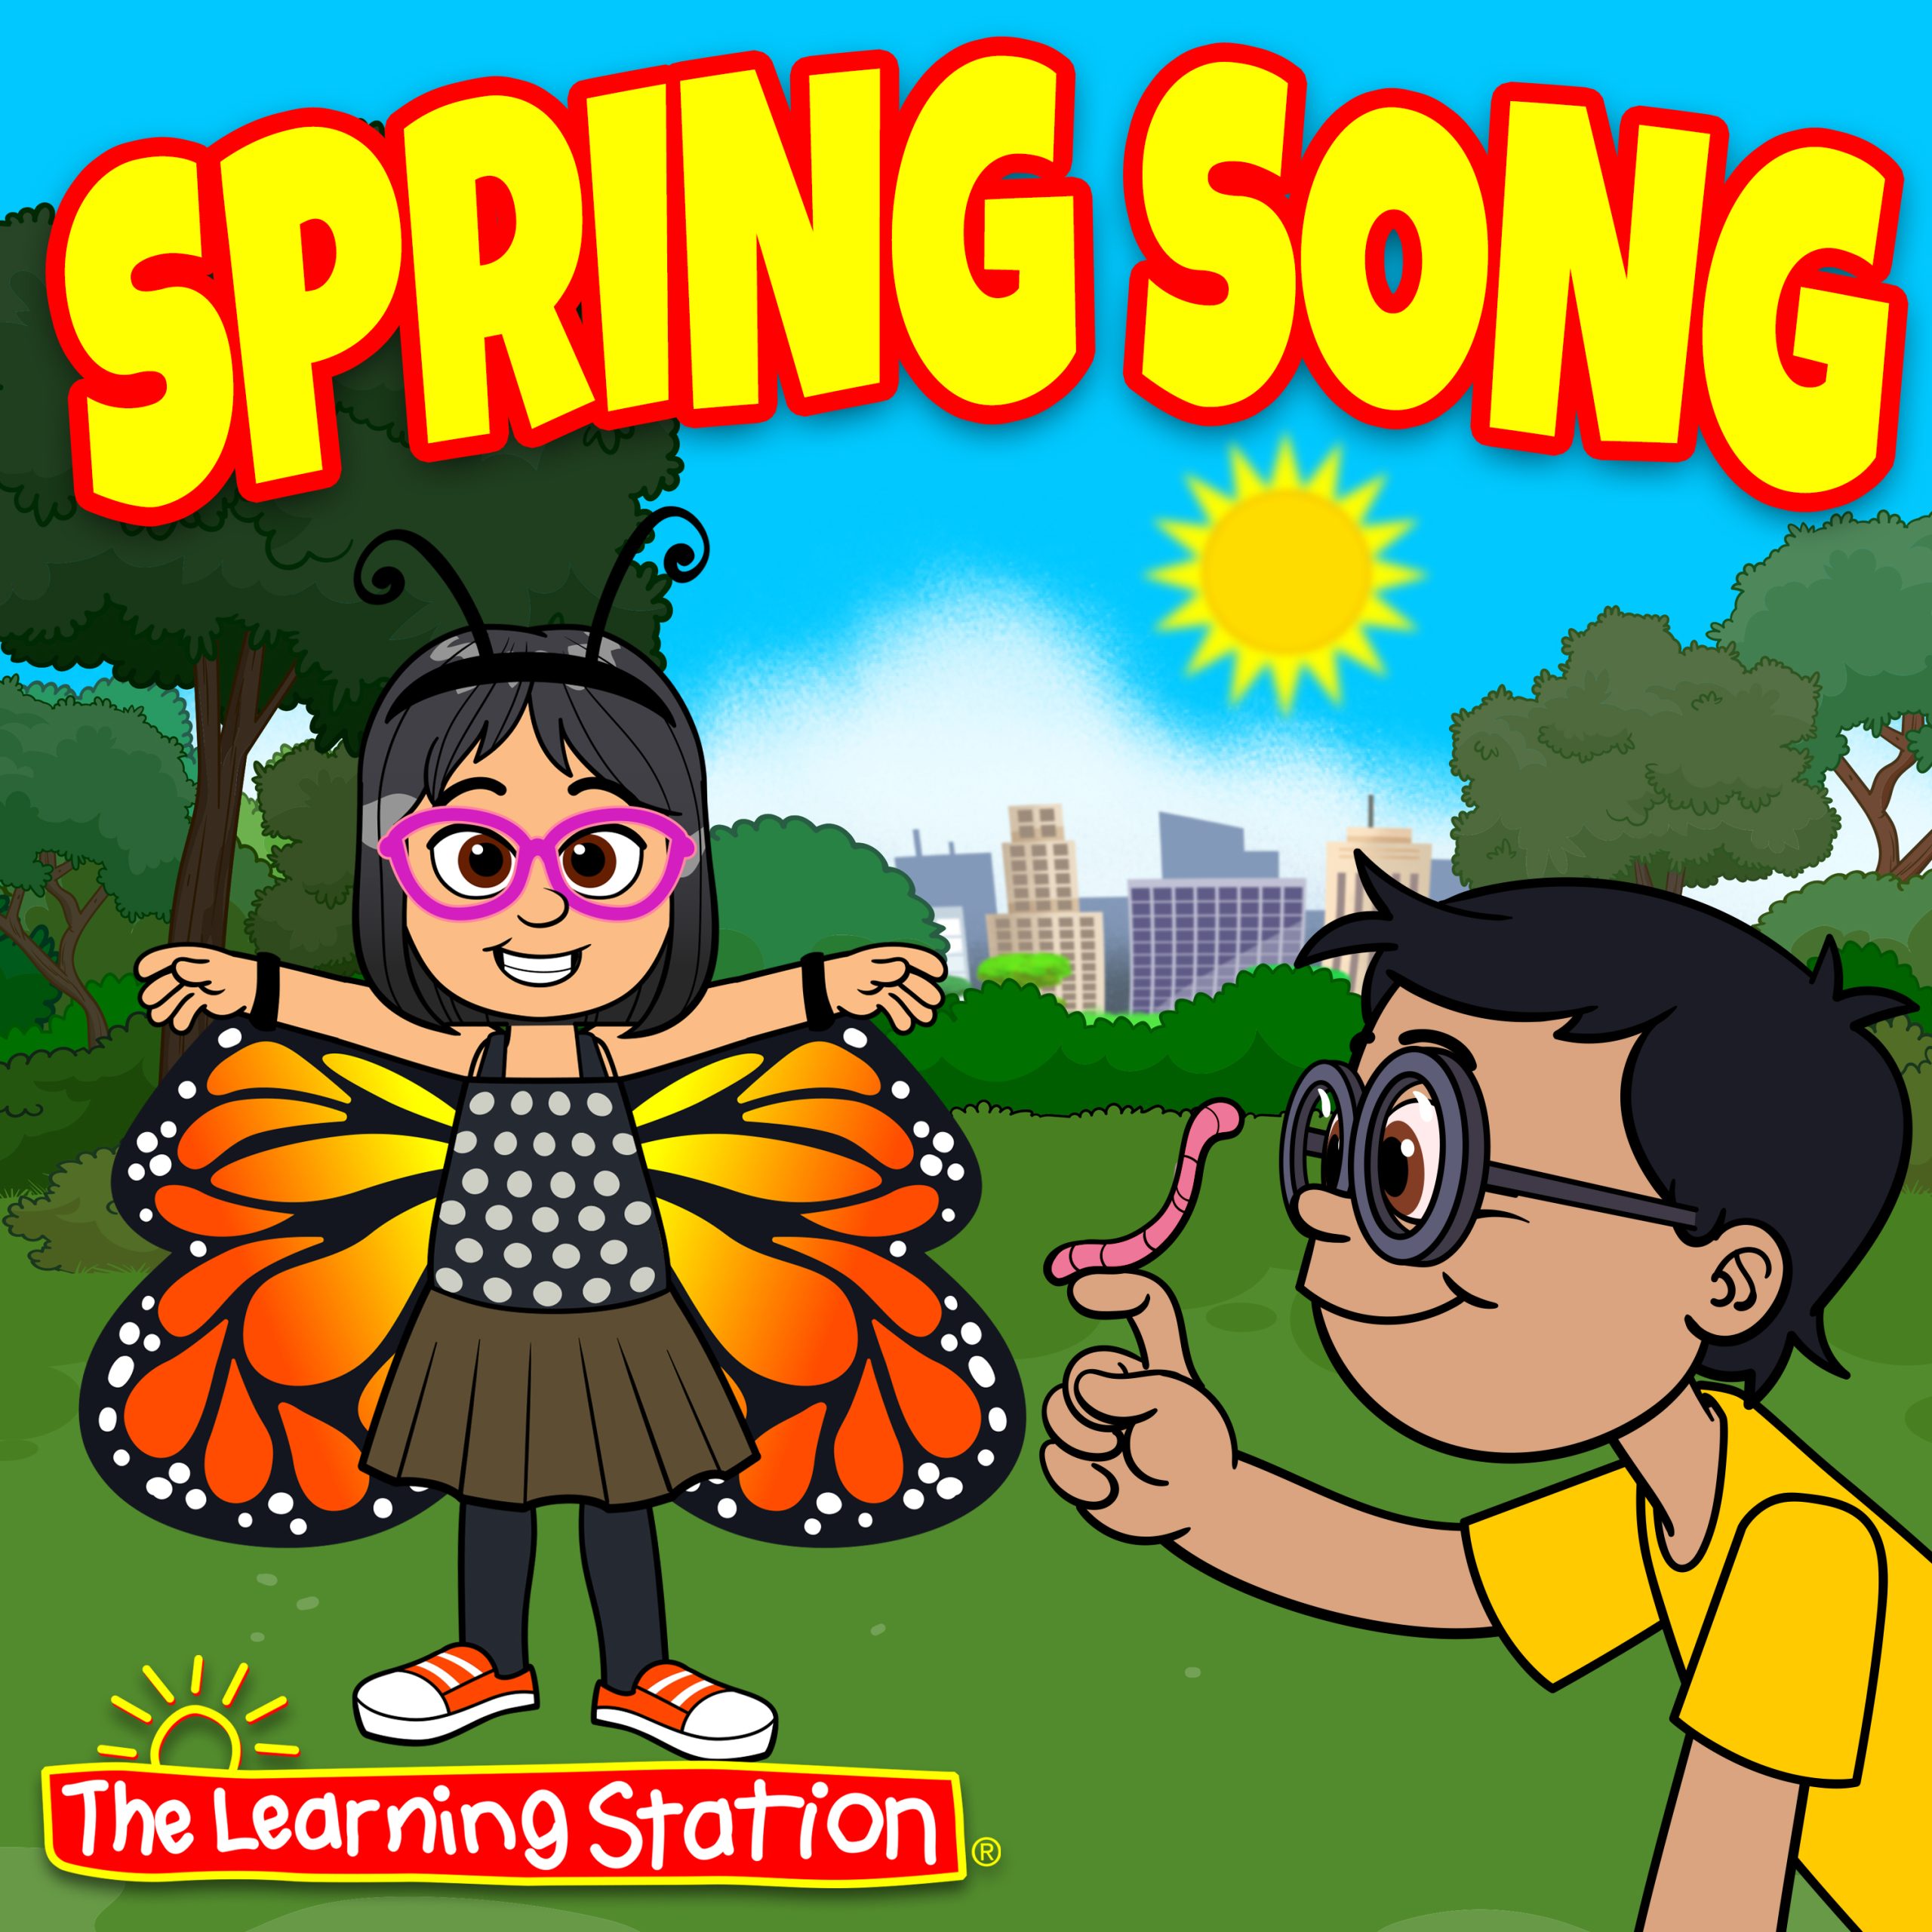 21 Action Songs and Rhymes that Celebrate Spring